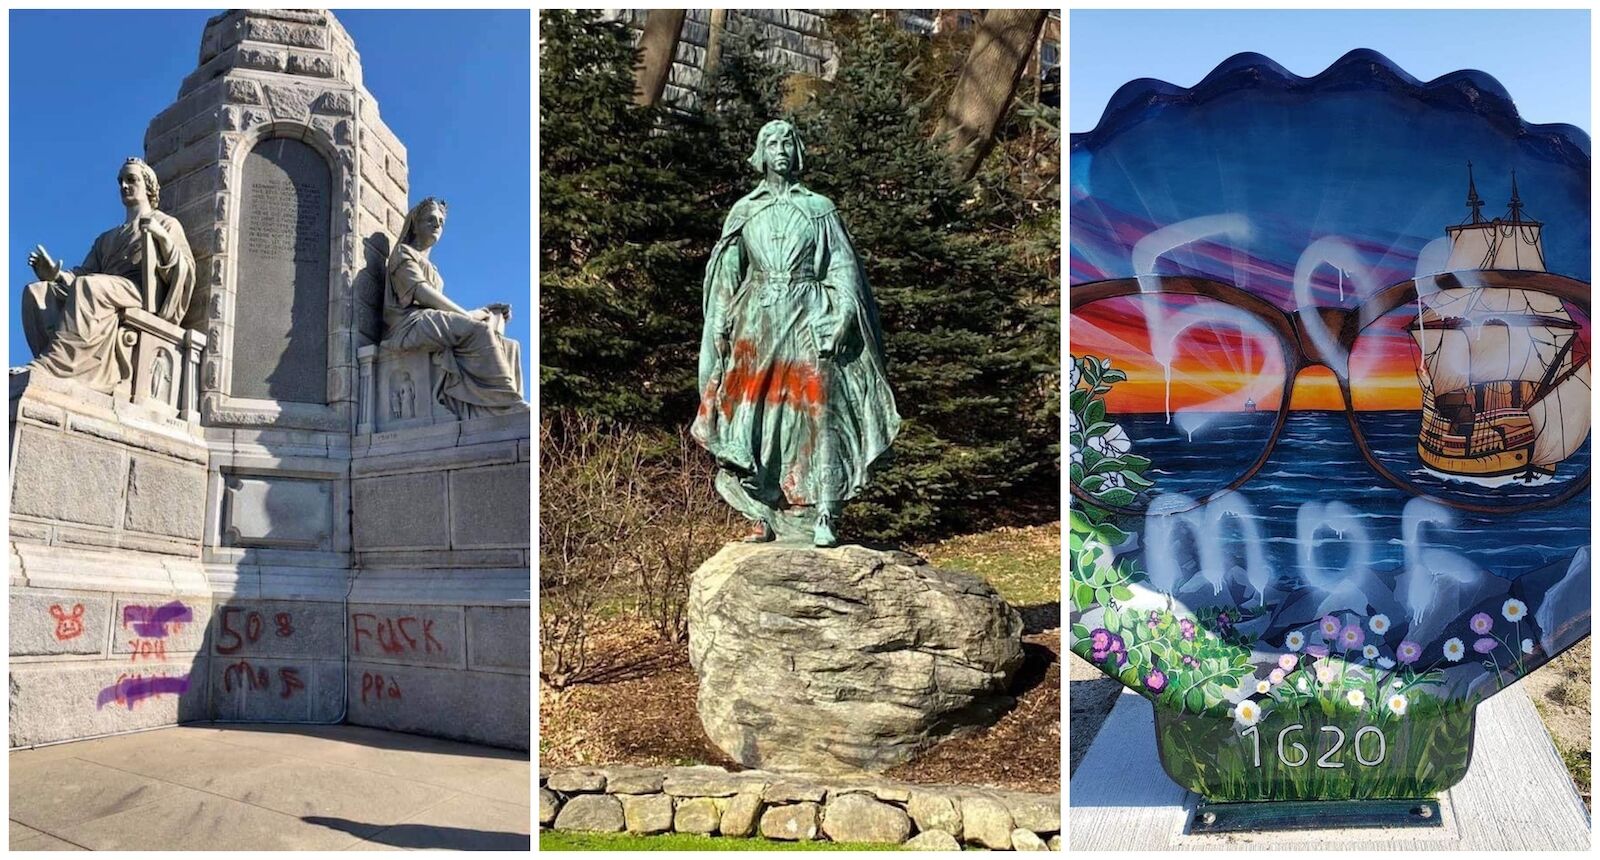 Plymouth Rock landmarks defaced by red spray paint